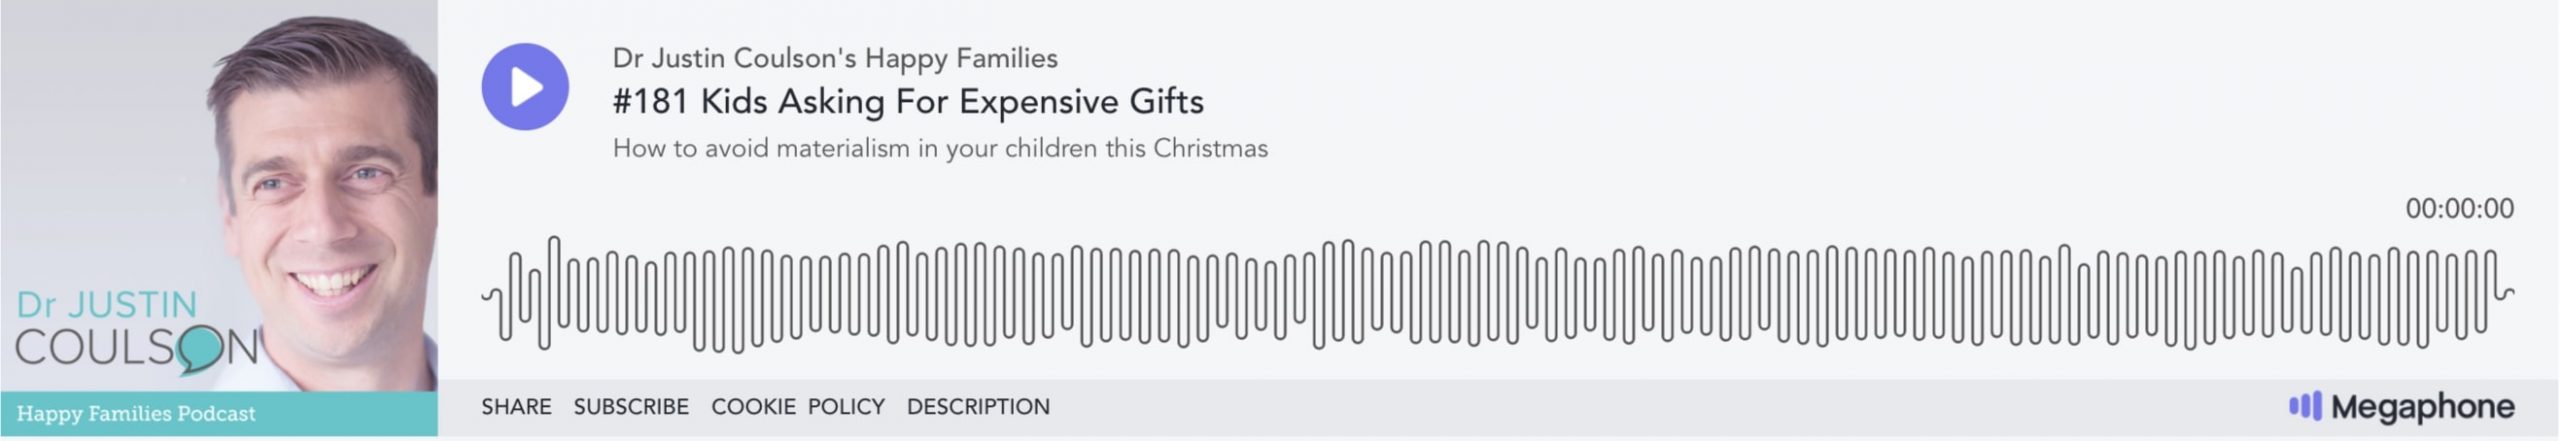 happy families podcast episode 181 kids asking for expensive gifts